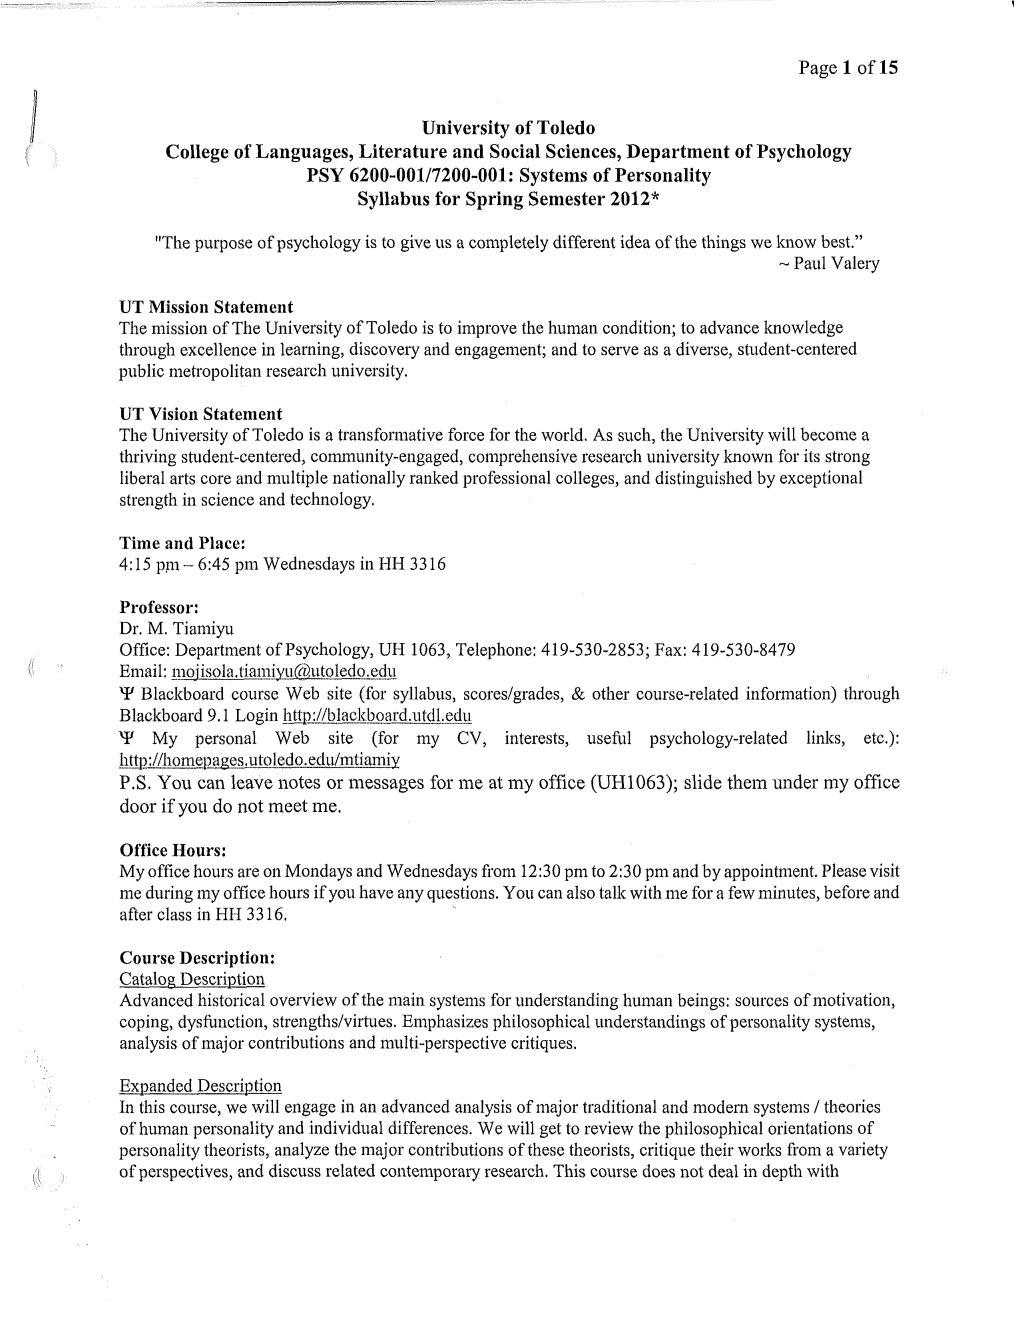 6200/7200 -- SYSTEMS of PERSONALITY COURSE CALENDAR -- SPRING 2012 (Subject to Modification)